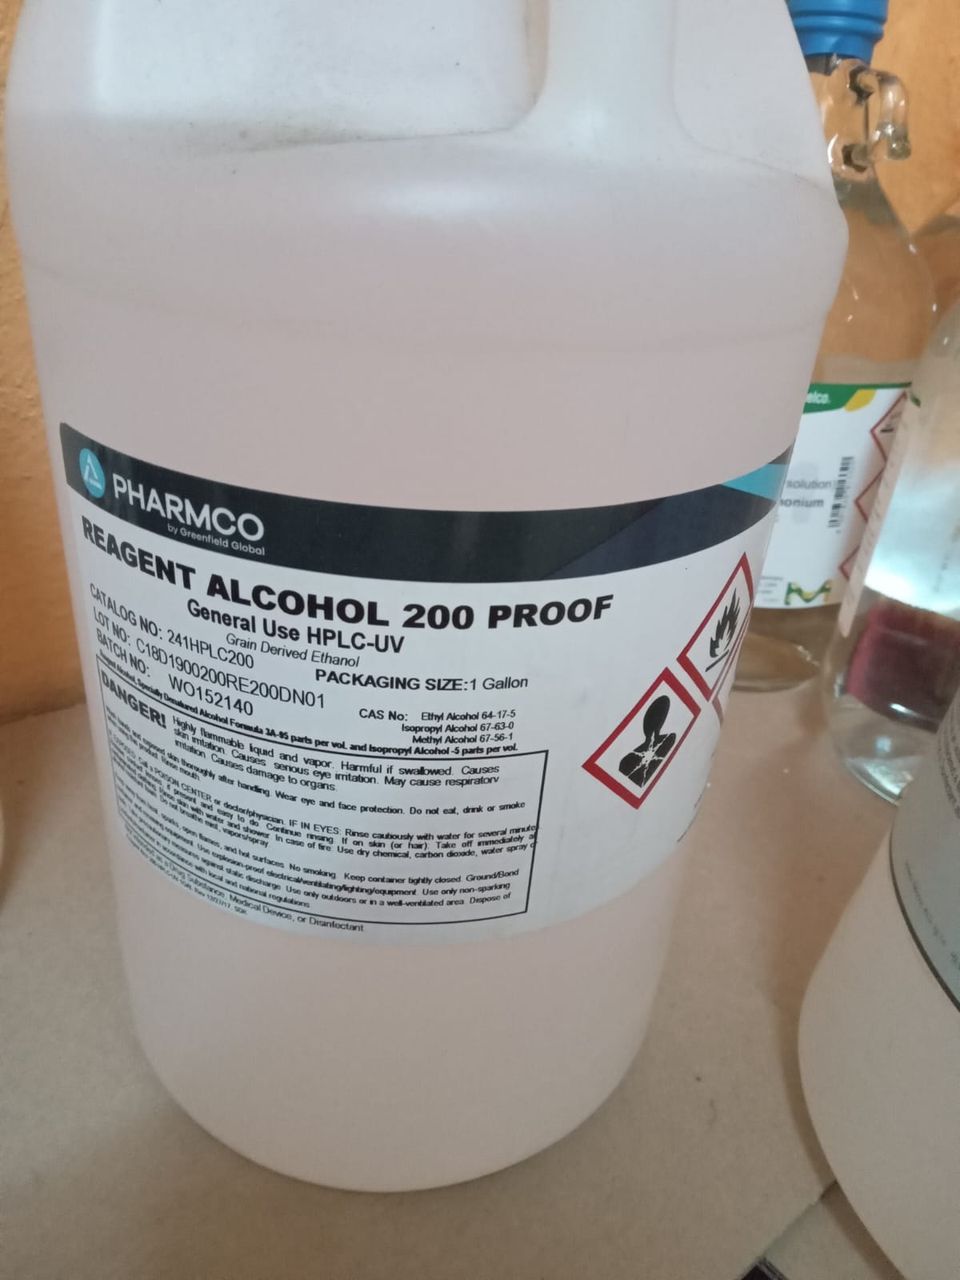 Reagent alcohol 200 proof 